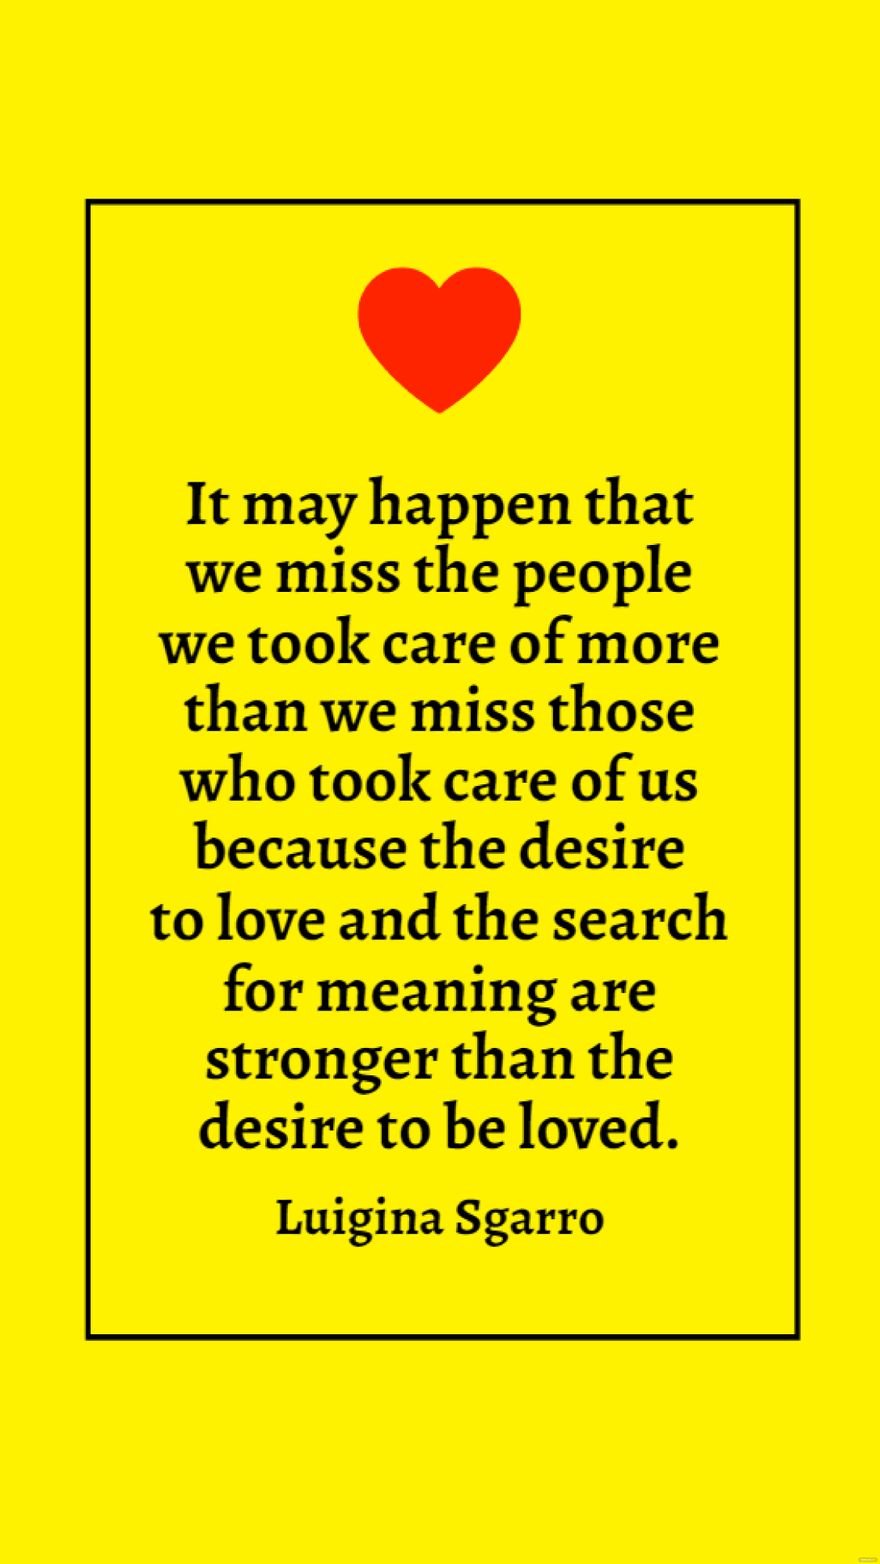 Luigina Sgarro - It may happen that we miss the people we took care of more than we miss those who took care of us because the desire to love and the search for meaning are stronger than the desire to